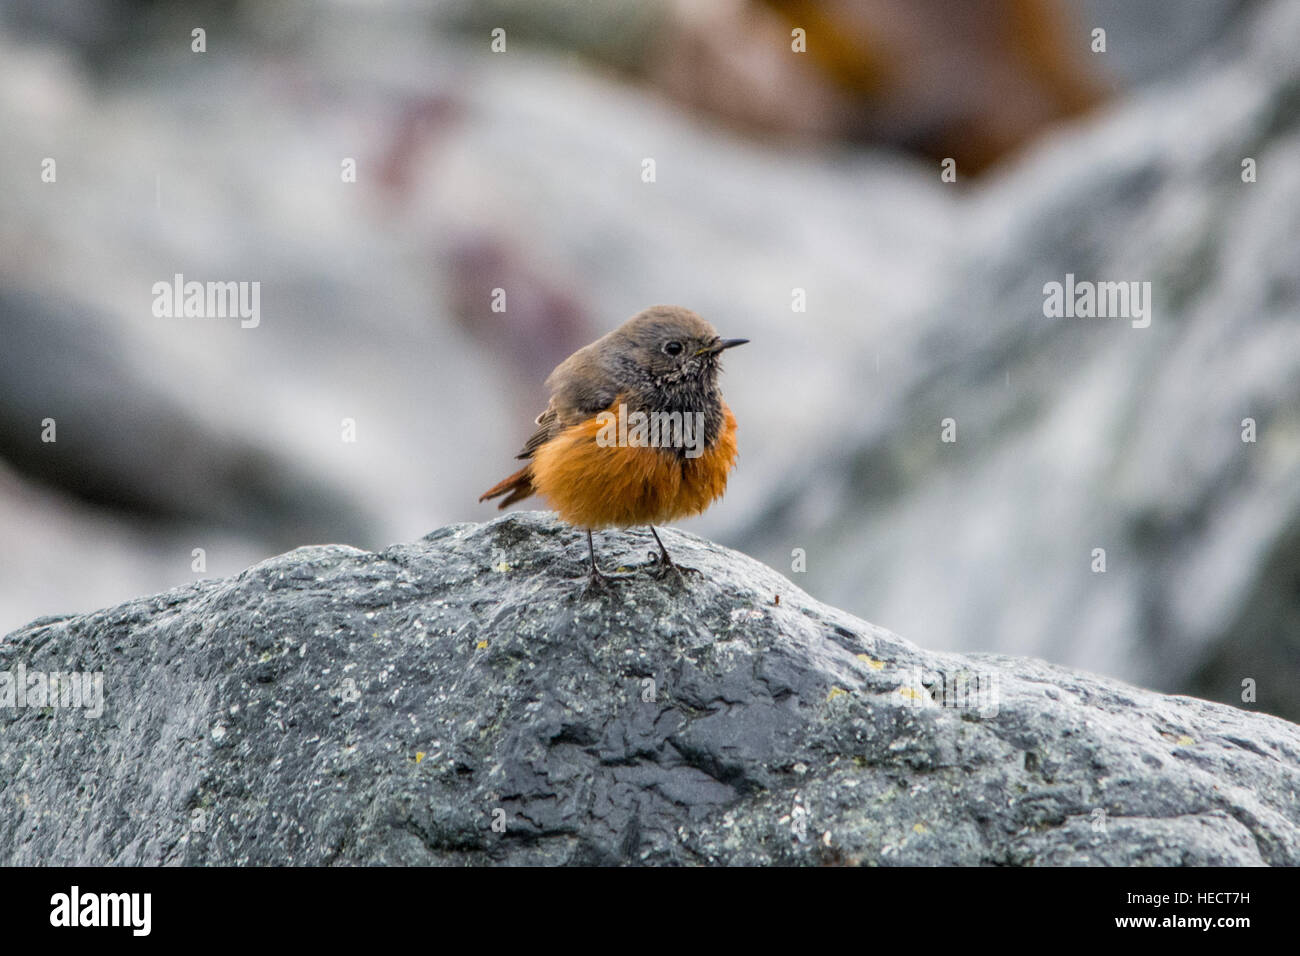 Mousehole, Cornwall, UK. 20th December 2016. A very rare Eastern Black Redstart bird(Phoenicurus ochruros phoenicuroides) has shown up on the seafront at Mousehole. Bird watchers are starting to gather in increasing numbers to see the bird. Credit: cwallpix/Alamy Live News Stock Photo